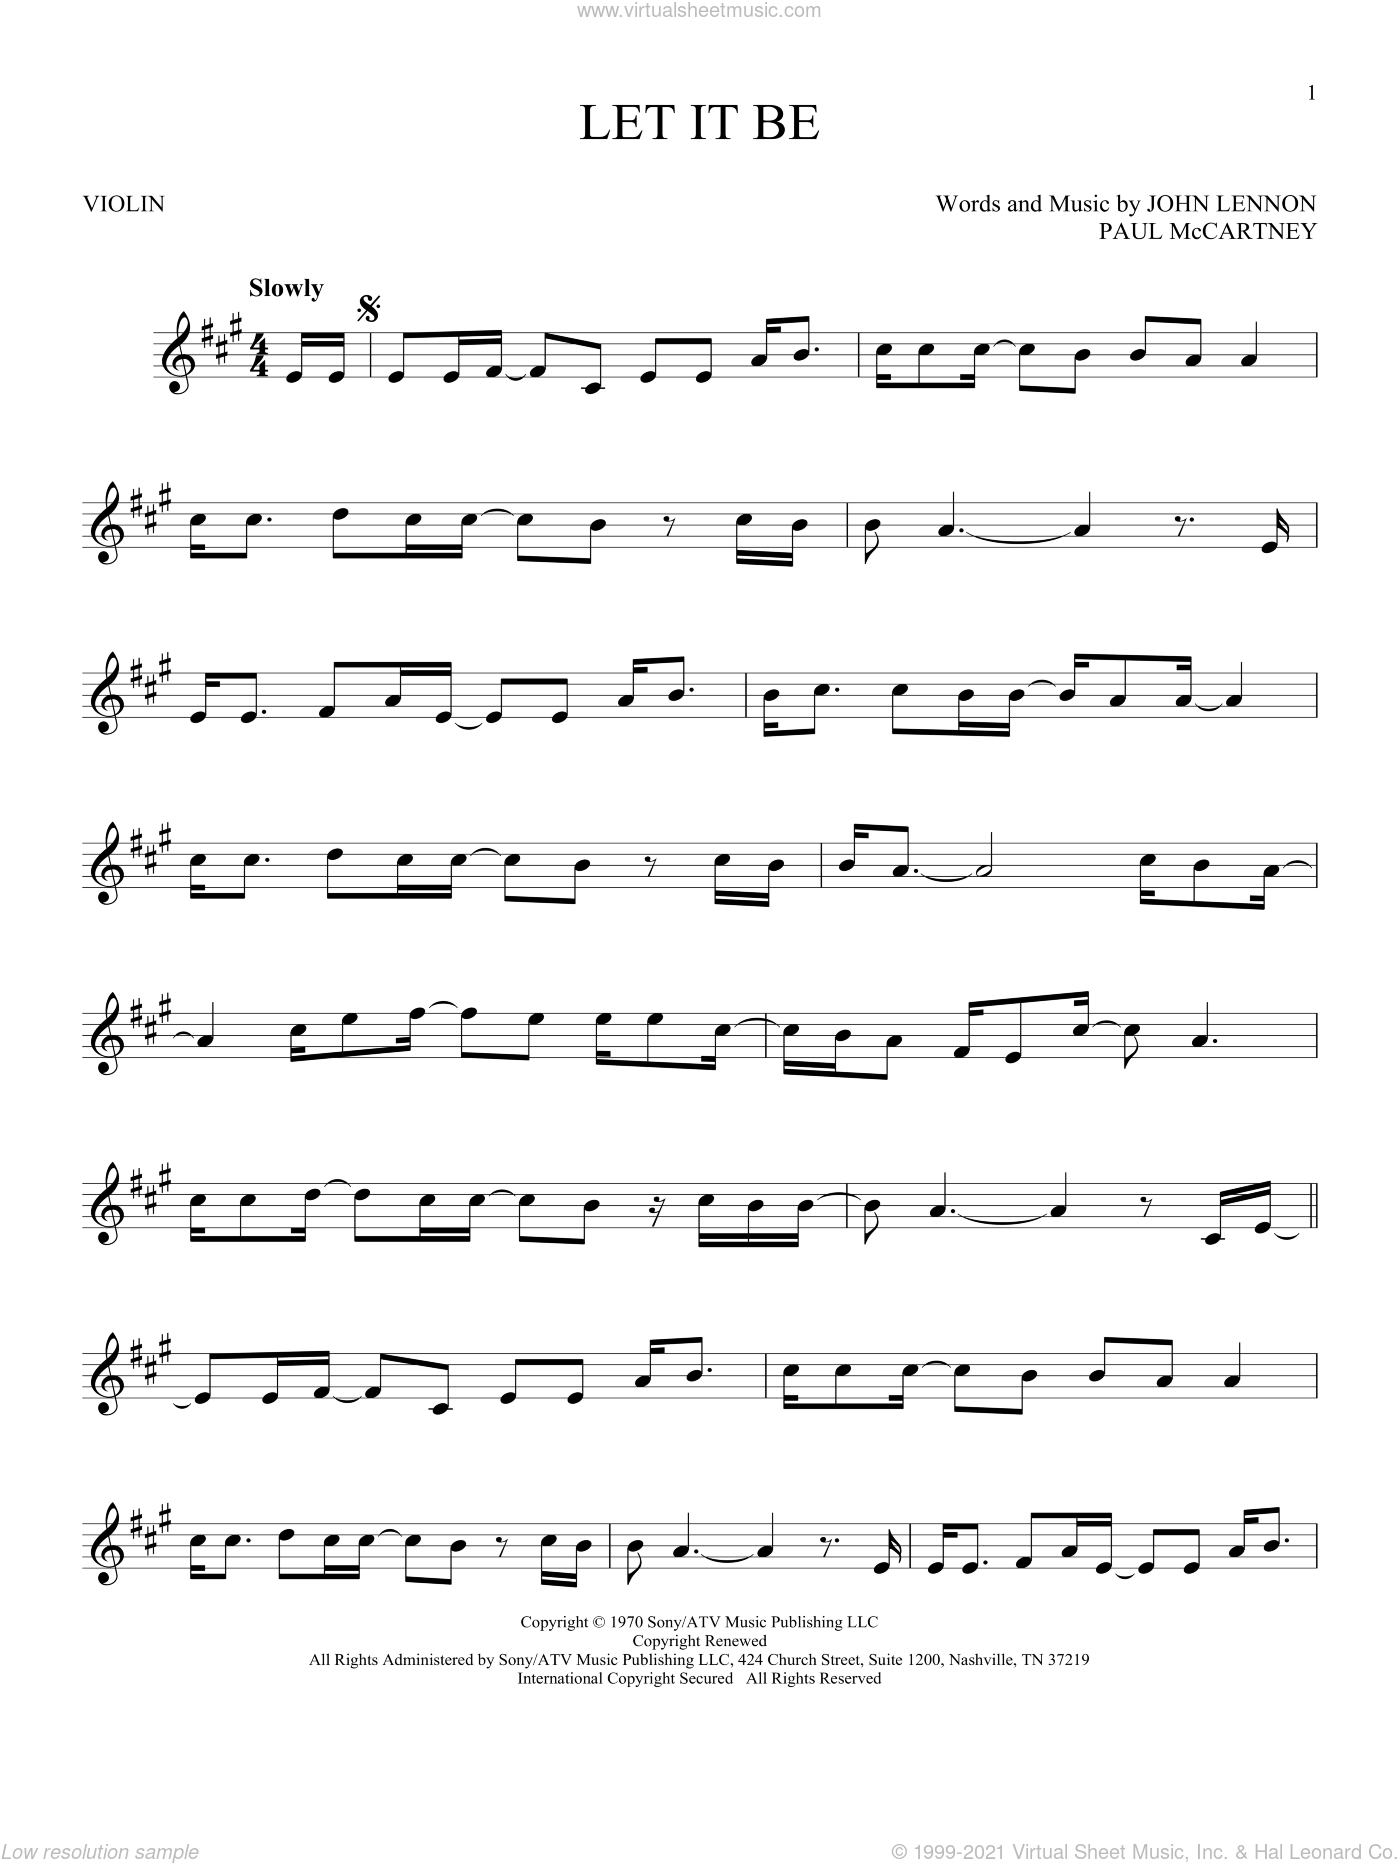 Beatles - Let It Be sheet music for violin solo [PDF-interactive]